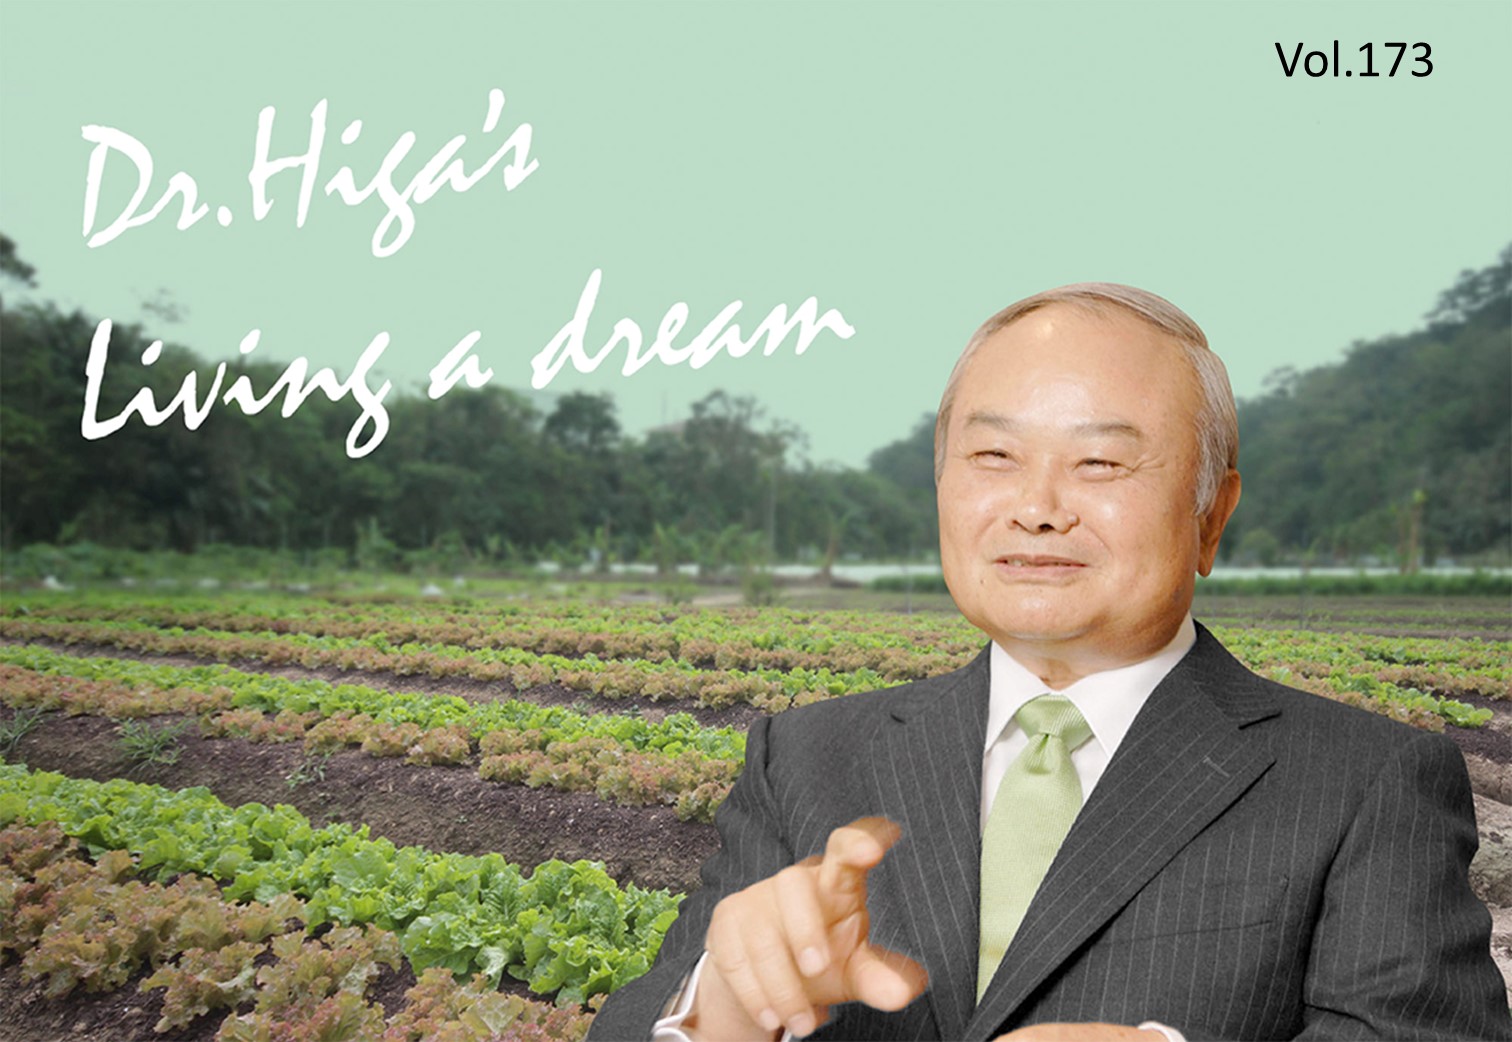 Dr. Higa's "Living a Dream": the latest article #173 is up!!!